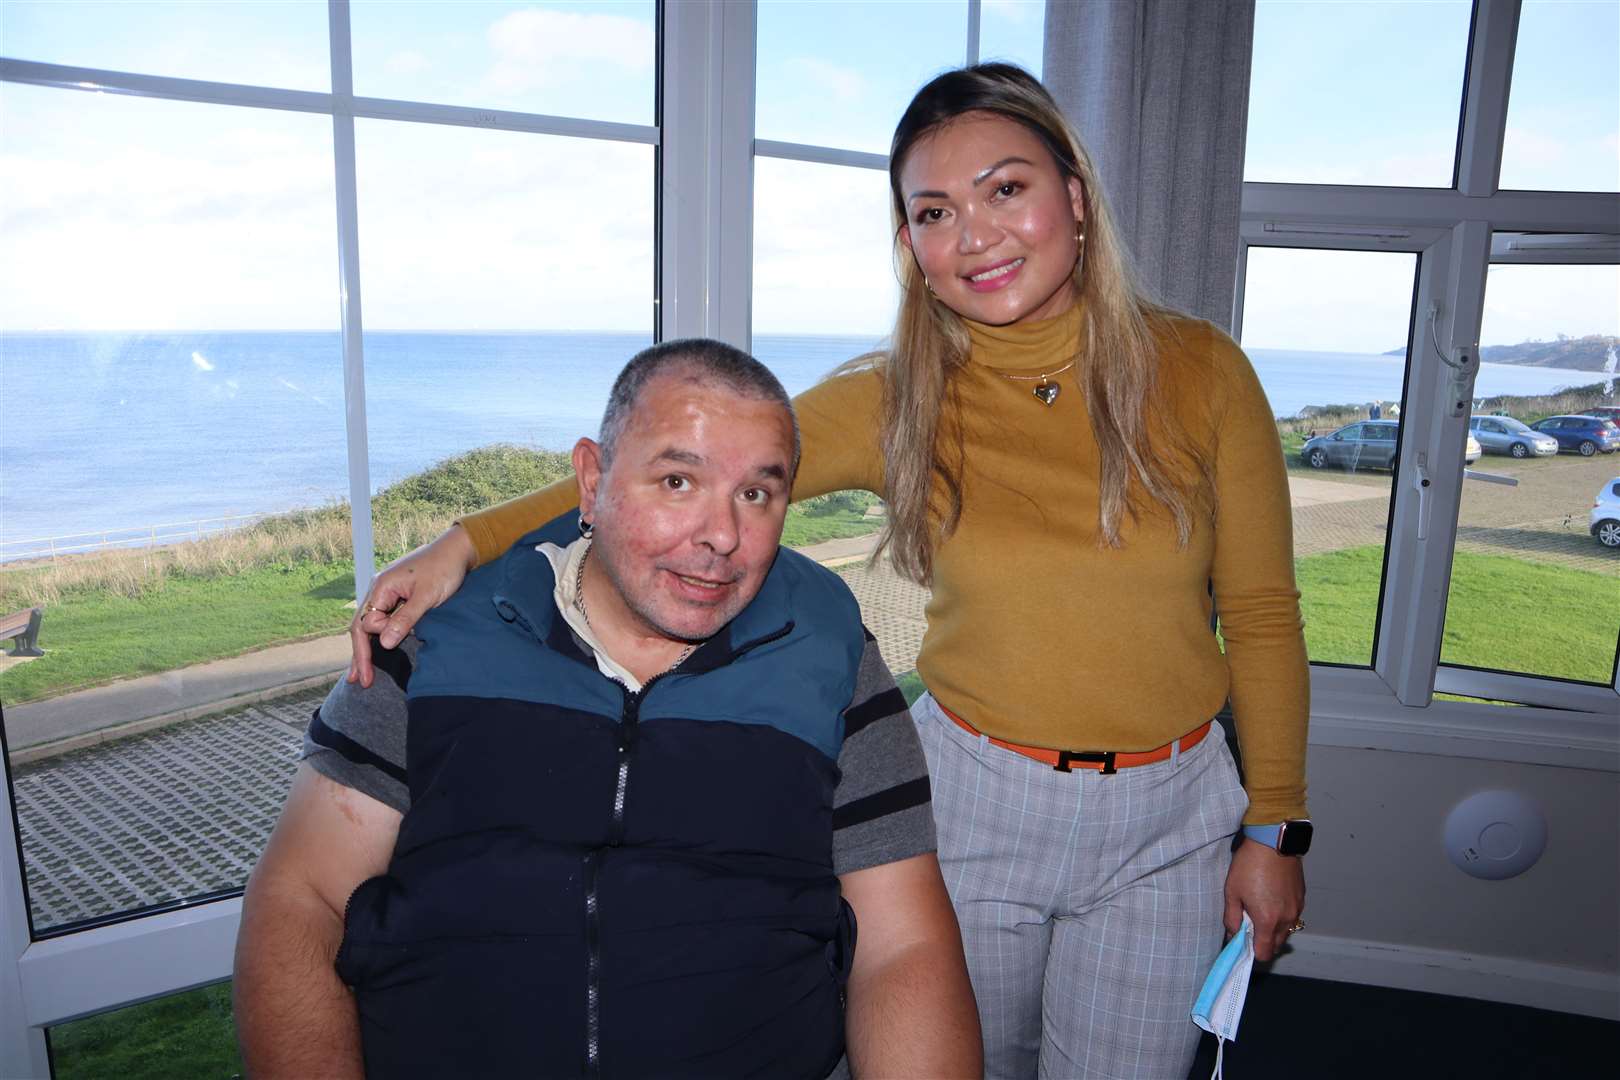 Former lorry driver Robin Searle, 51, from Sittingbourne, pictured with staff member Leah Fisher, is a resident at the Little Oyster residential home on The Leas at Minster, Sheppey, since suffering a stroke